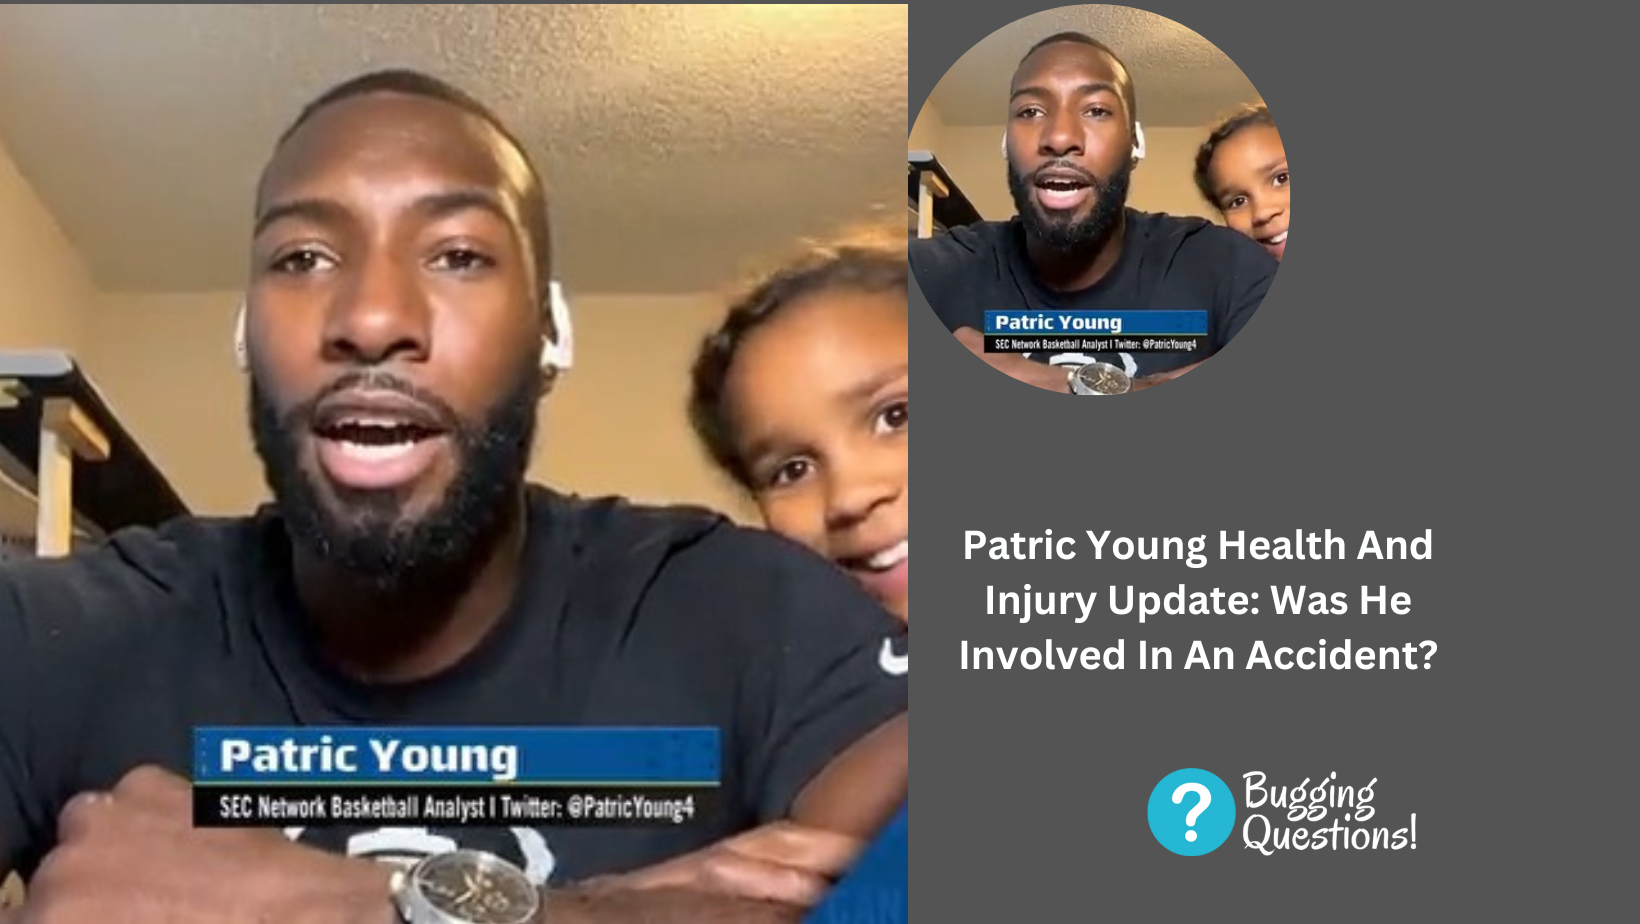 Patric Young Health And Injury Update: Was He Involved In An Accident?